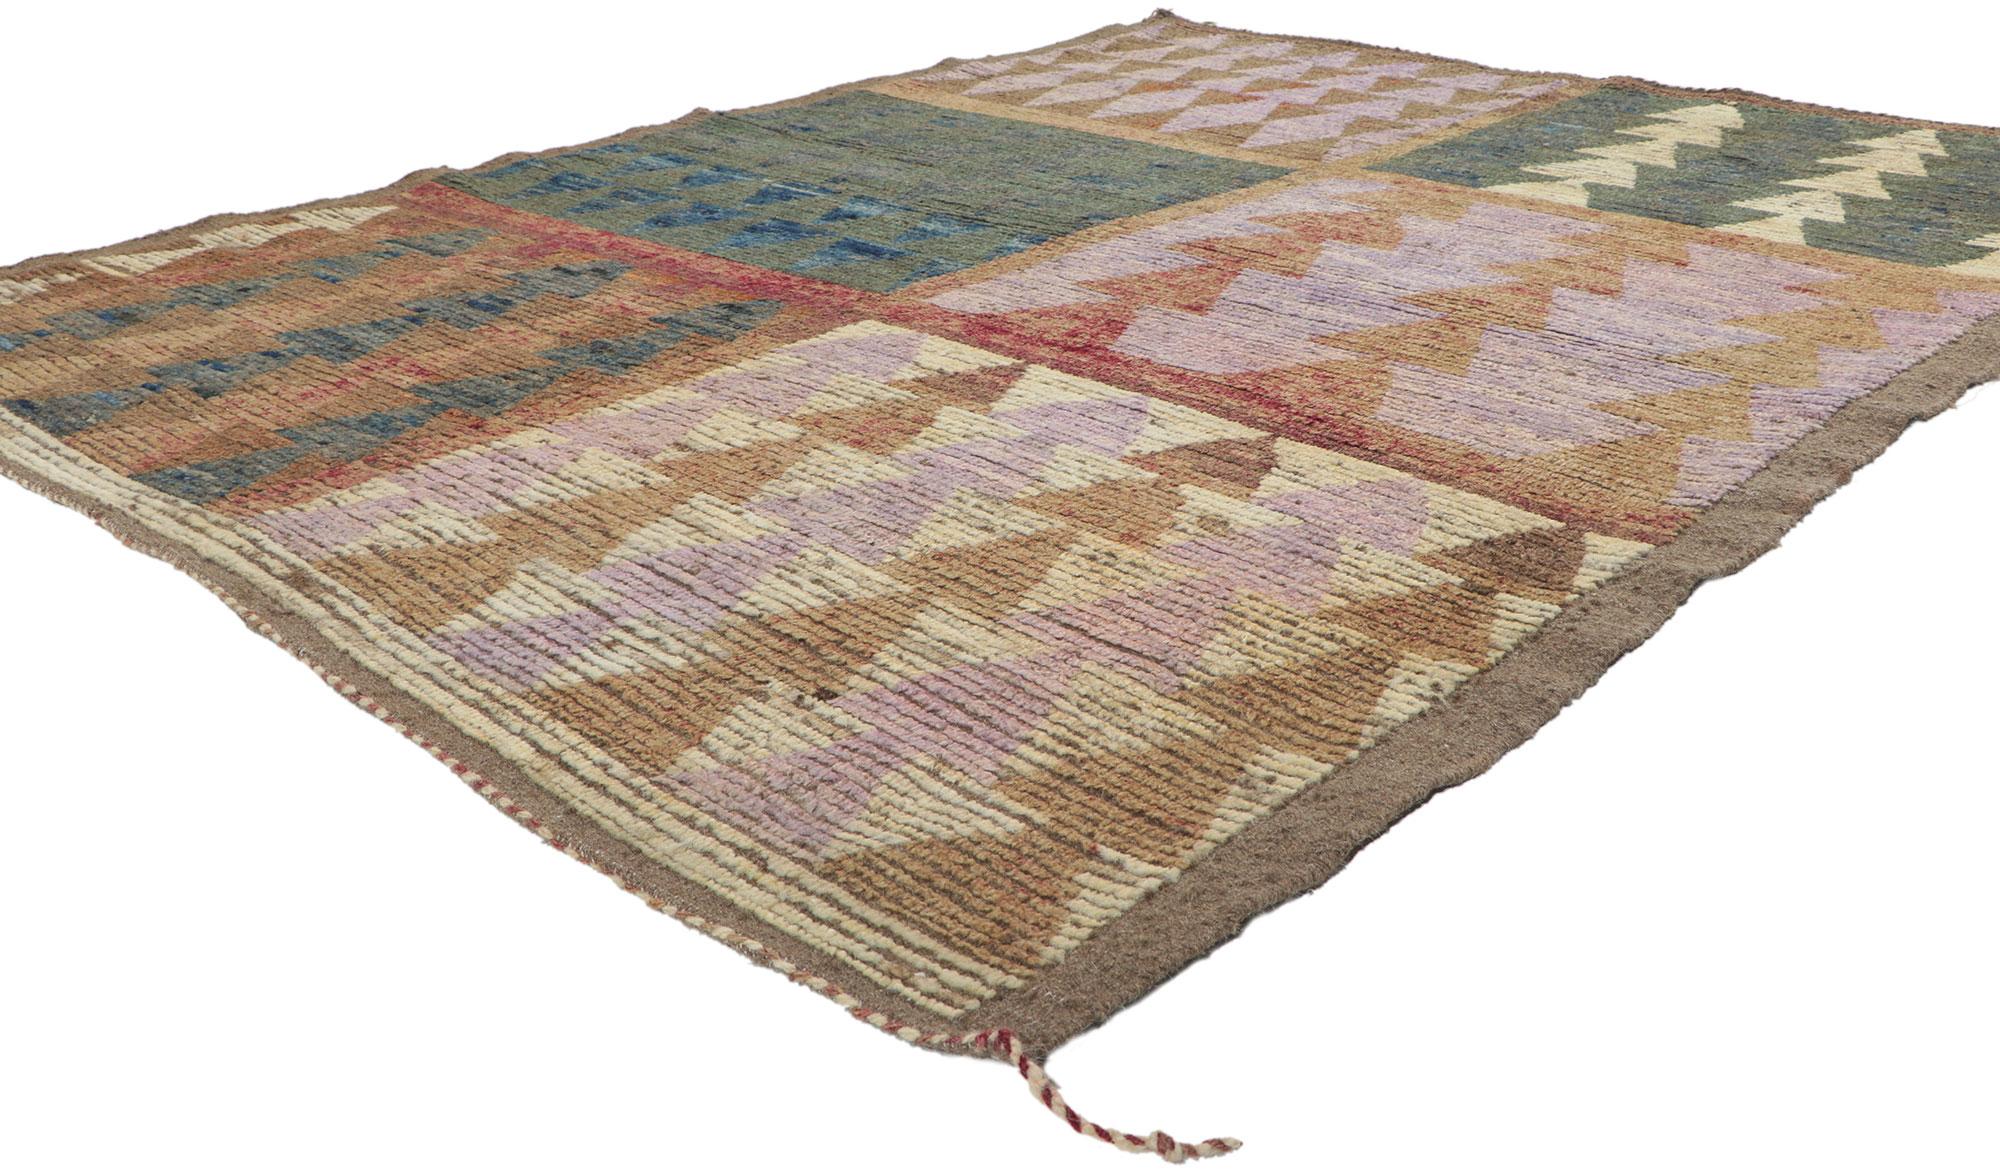 80785 Earth-Tone Moroccan Rug, 05'09 x 07'08.
​Bauhaus Design meets earth-tone elegance in this hand knotted wool modern Moroccan rug. The asymmetric details and earthy hues woven into this piece work together resulting in an iconic yet relaxed